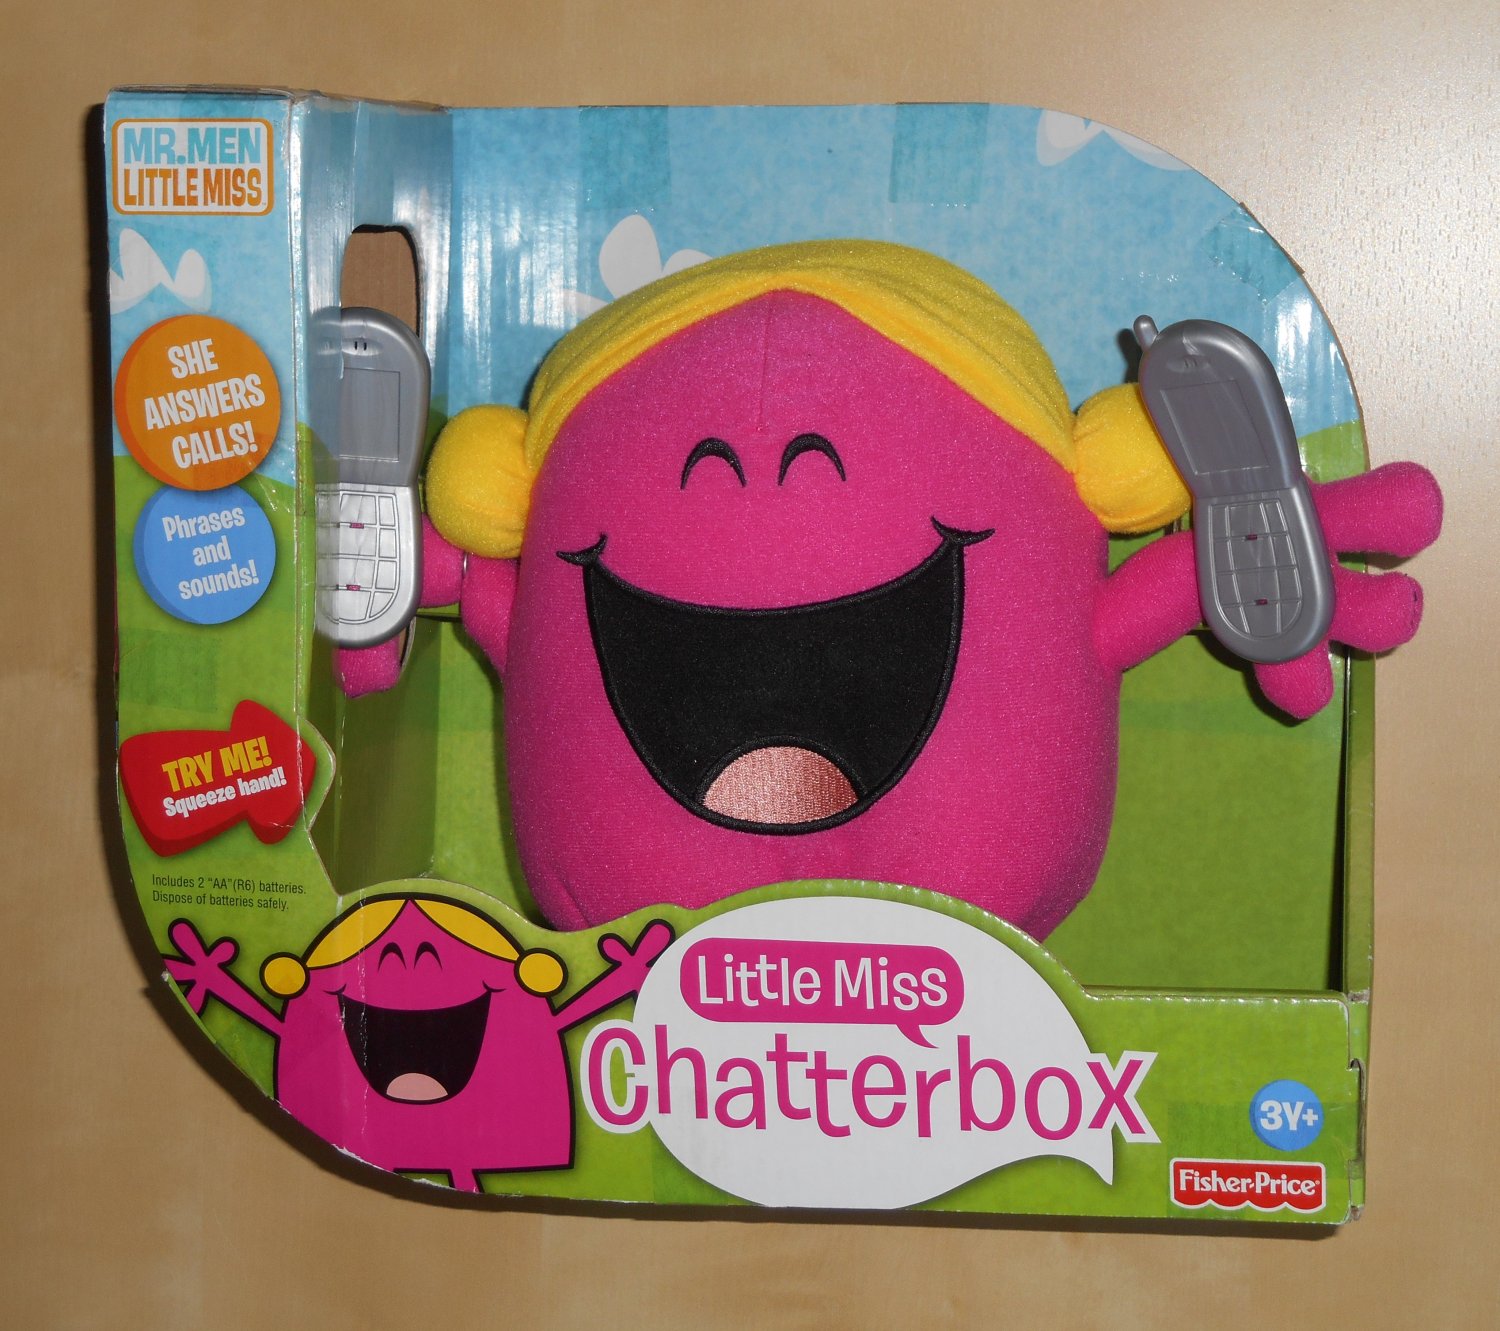 Mr Men Little Miss Chatterbox Electronic Talking Plush Doll Toy Answers Telephone Calls FP P7742